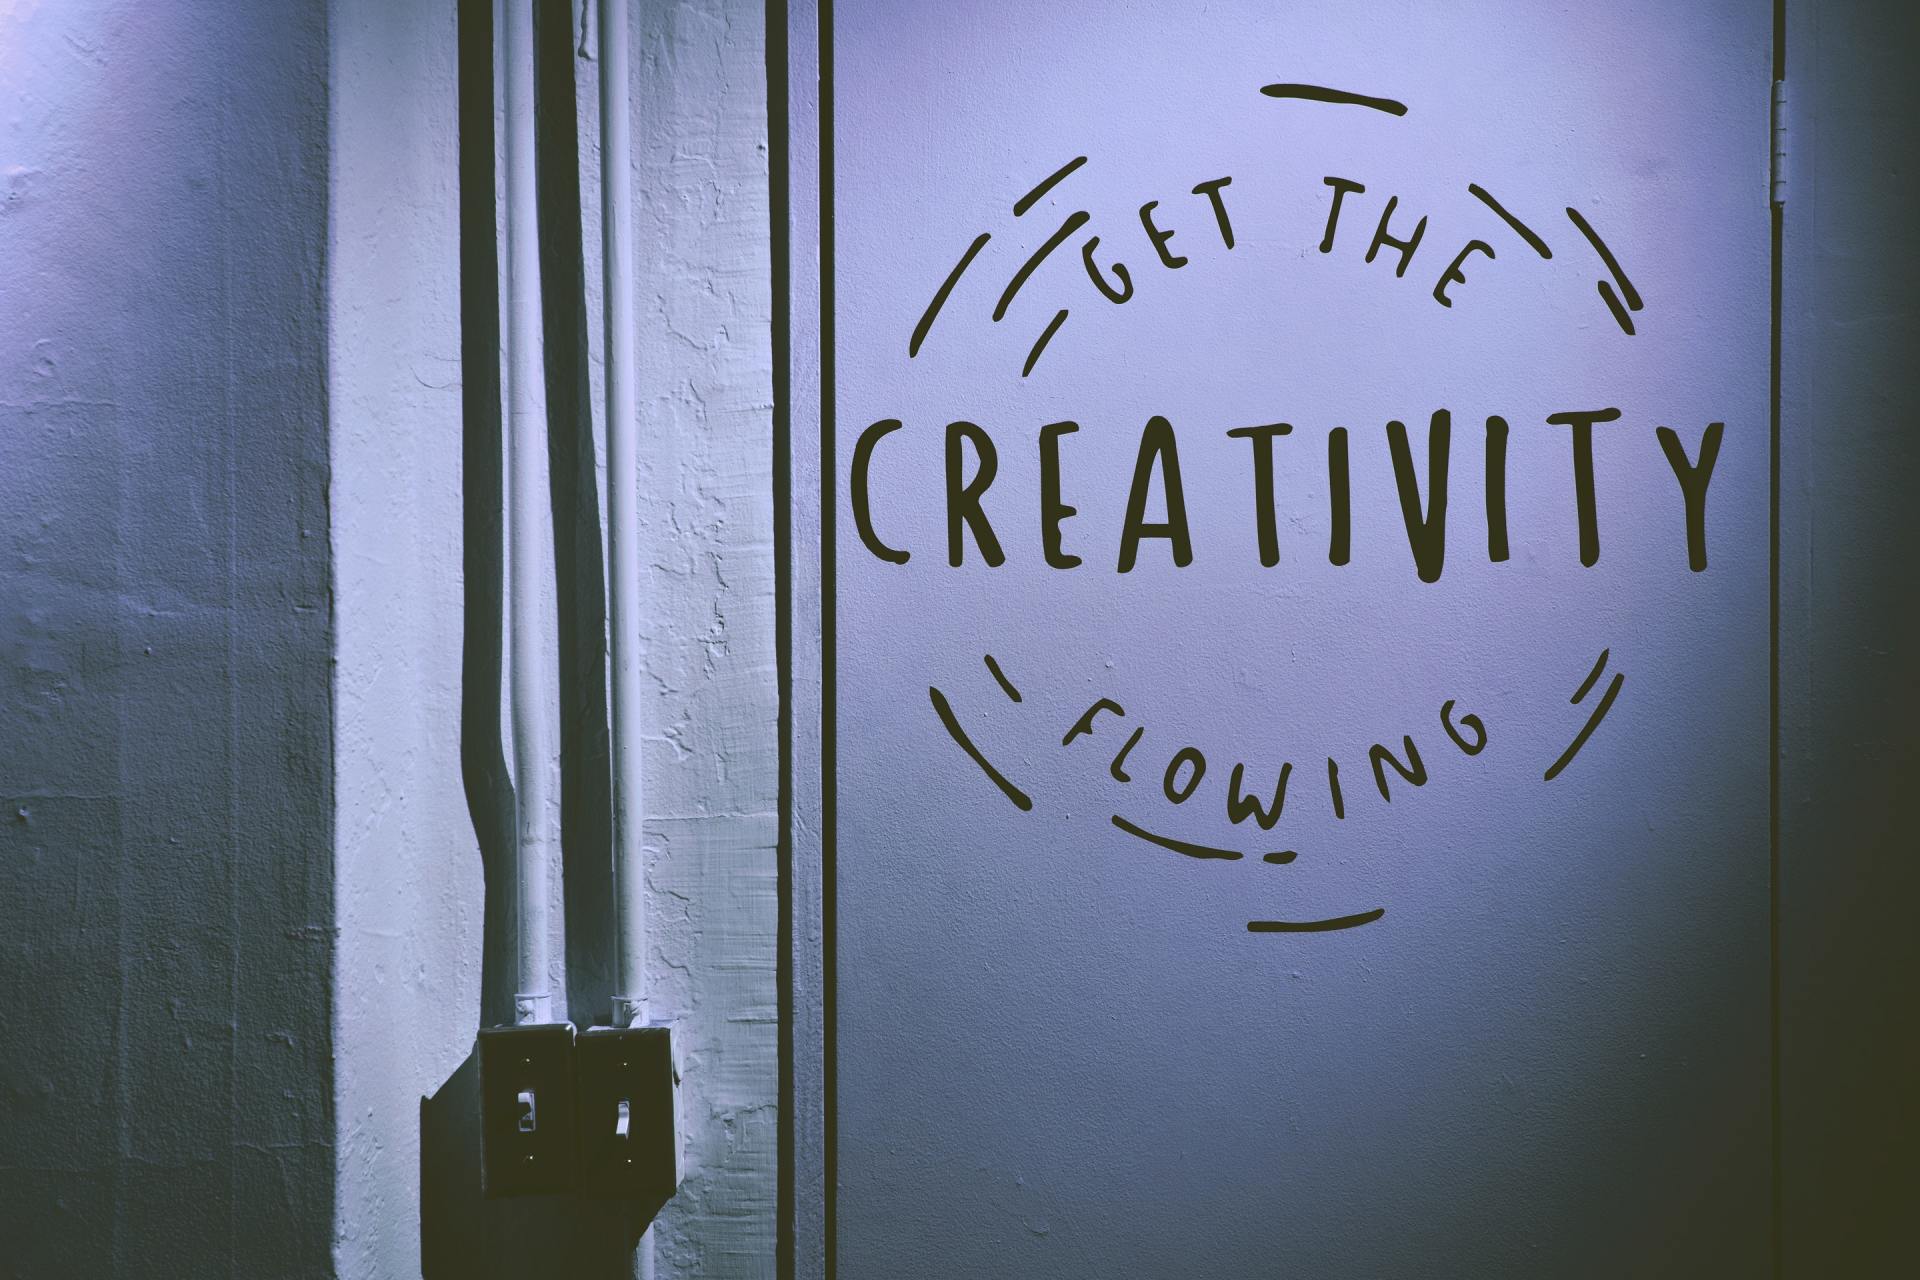 A sign on a wall that says get the creativity flowing